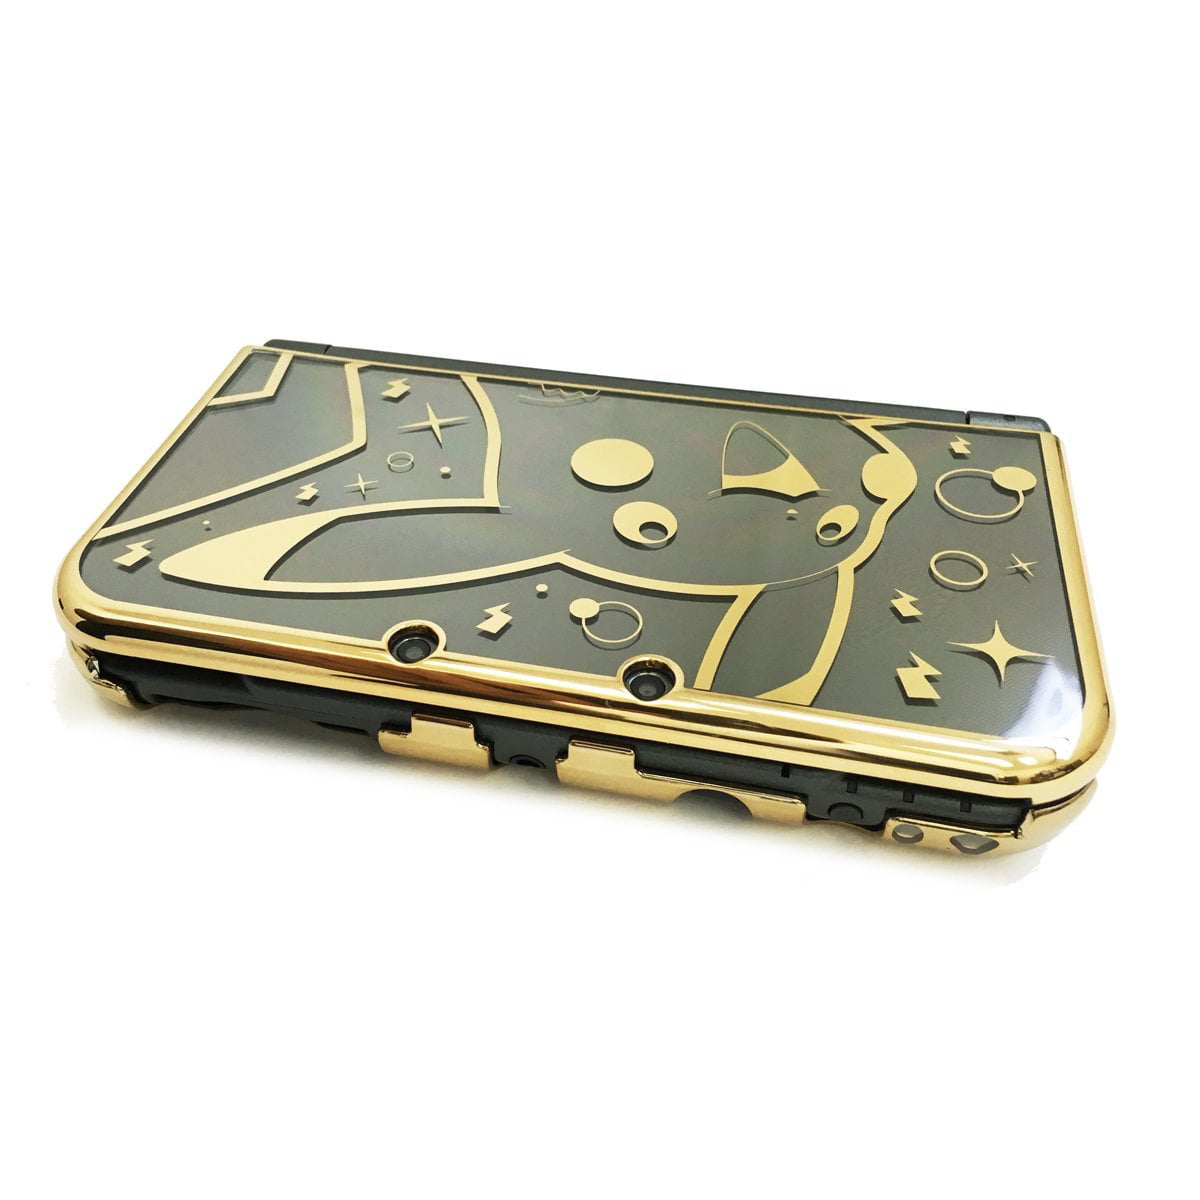 HORI Official Pikachu Premium Gold Protector for New Nintendo 3DS Licensed by Nintendo & - Walmart.com